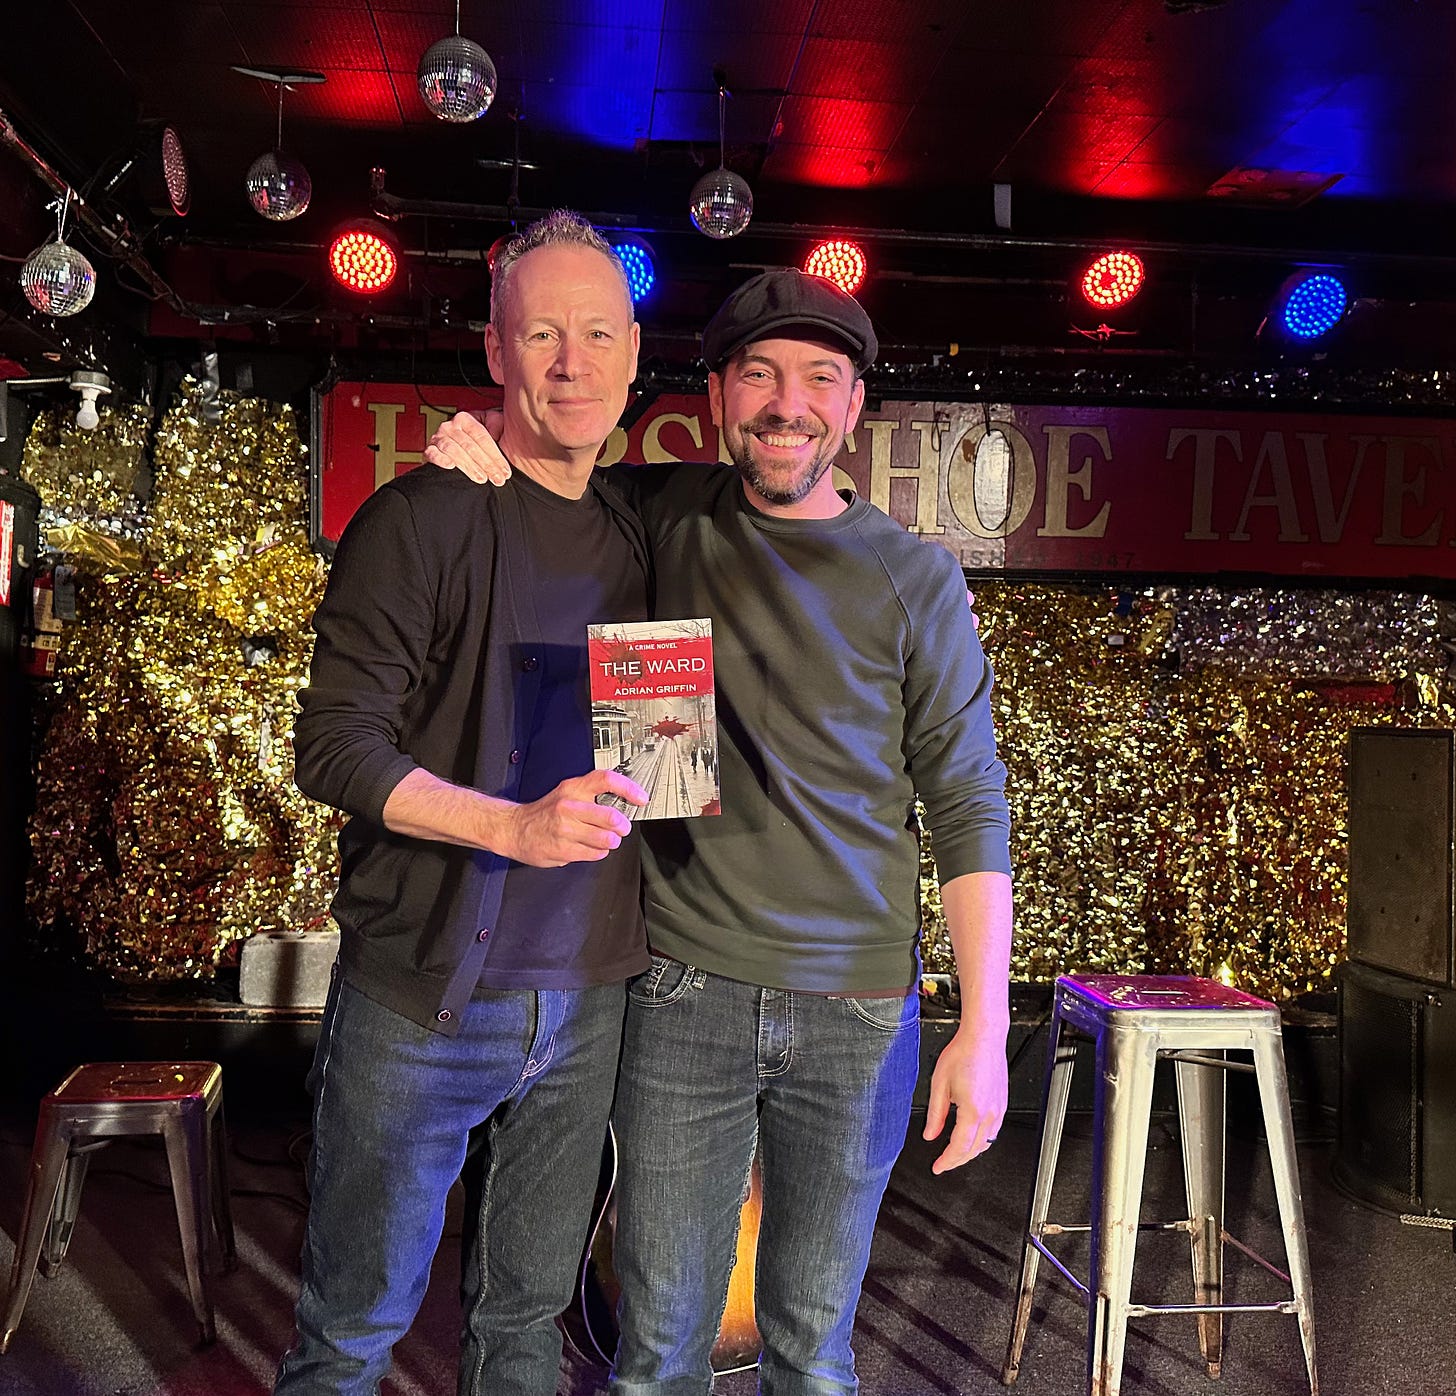 Adrian Griffin and Justin Rutledge posing with Adrian's novel onstage at the Horseshoe Tavern, Toronto